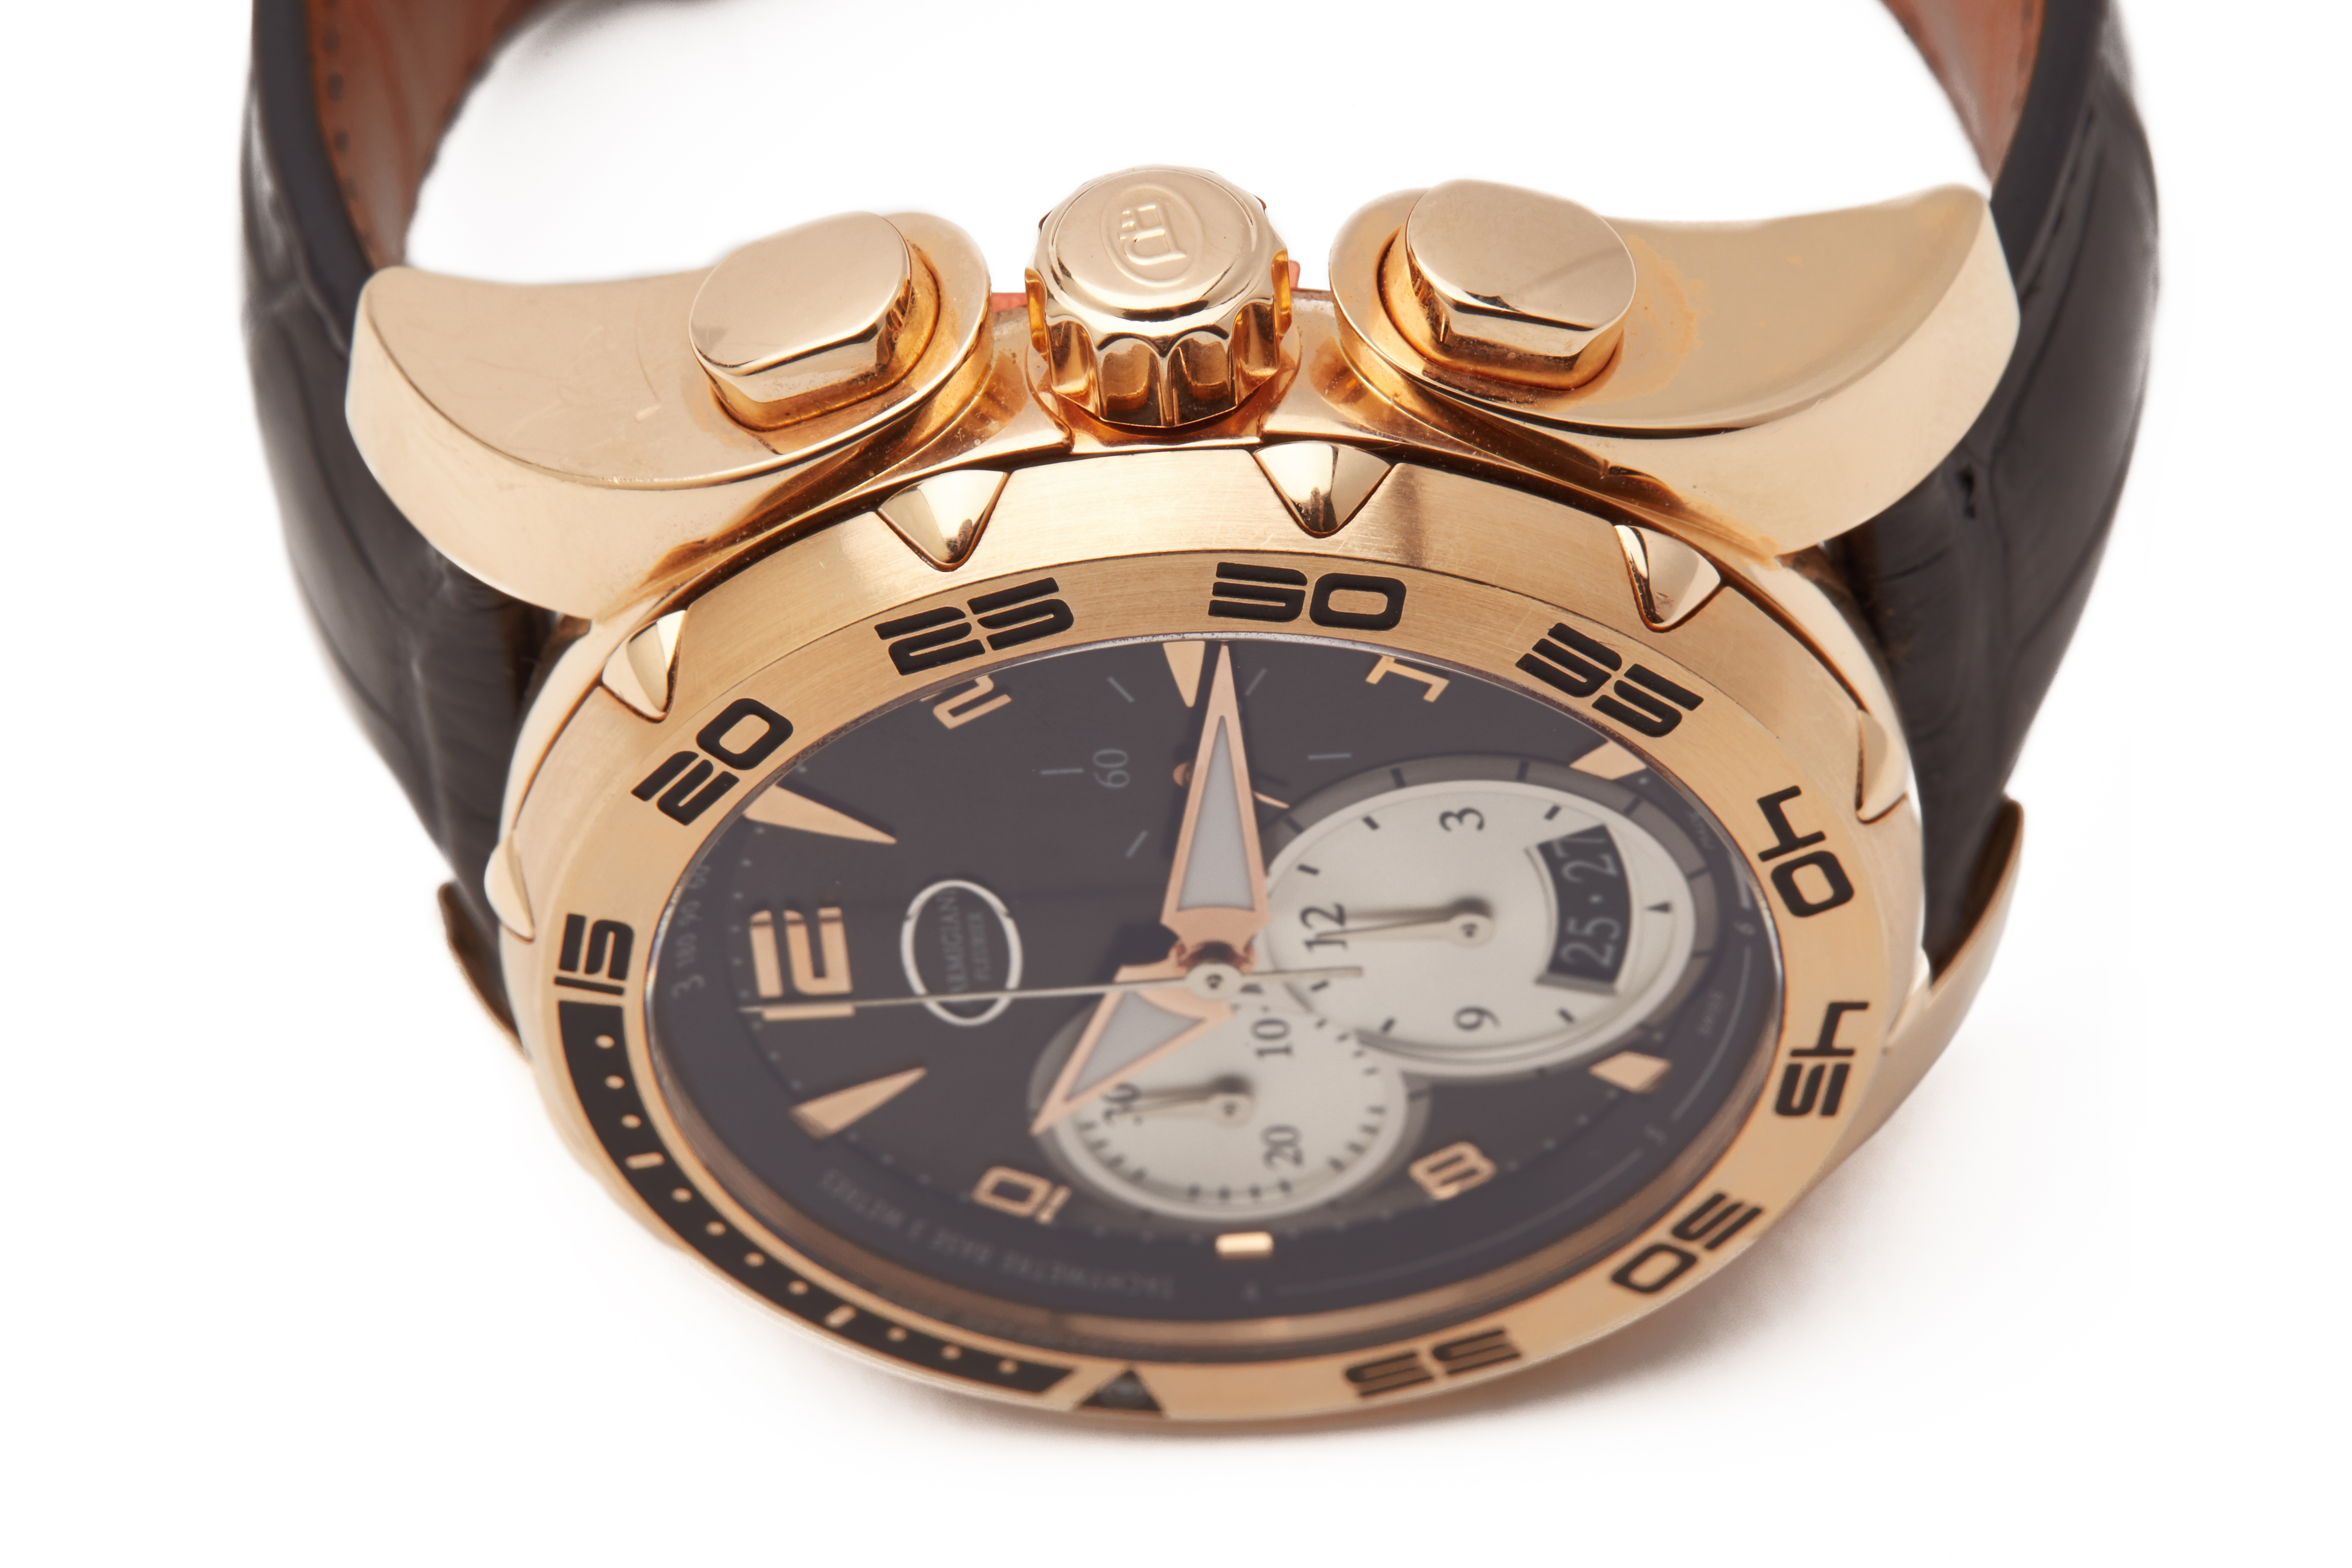 PARMIGIANI FLEURIER PERSHING 005 GOLD CHRONOGRAPH WATCH - Image 7 of 7